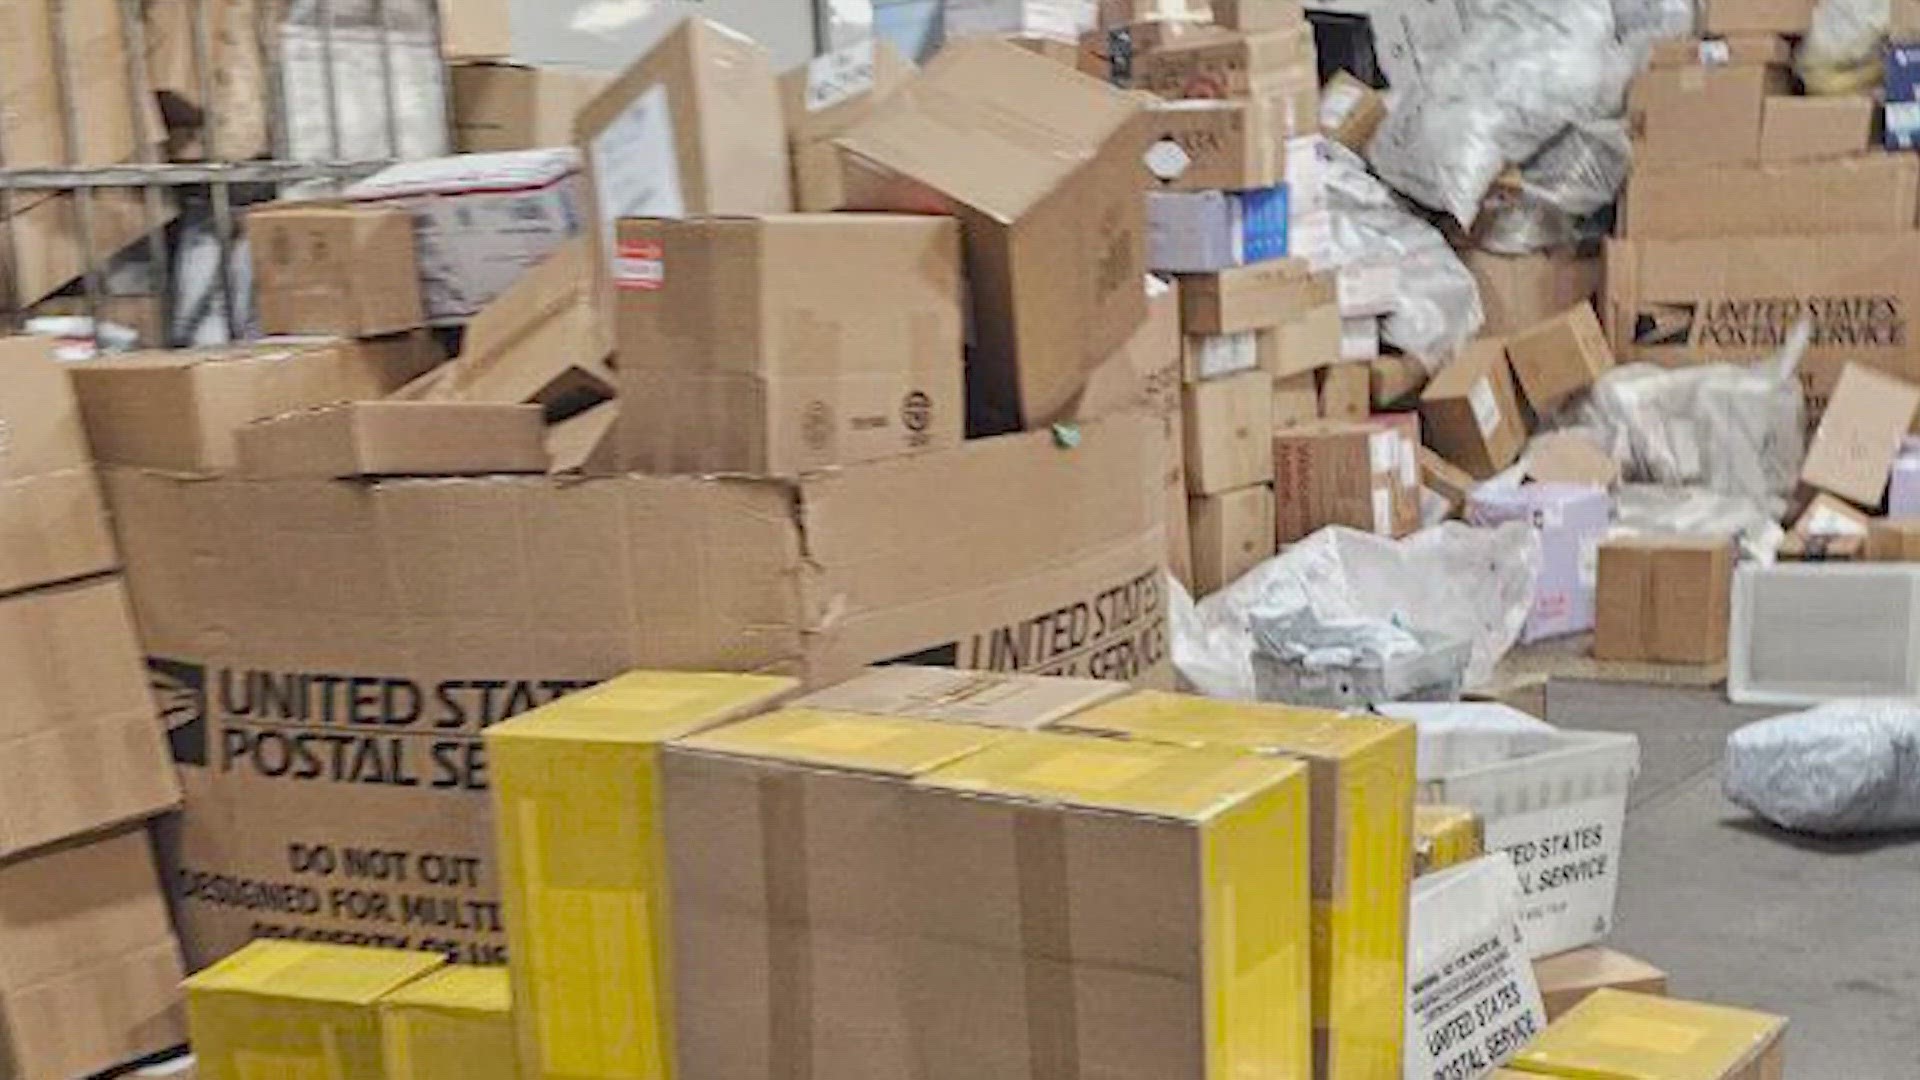 Emails continue pouring into our newsroom with complaints from USPS customers whose packages, including medicine, are stuck at Houston-area distribution centers.